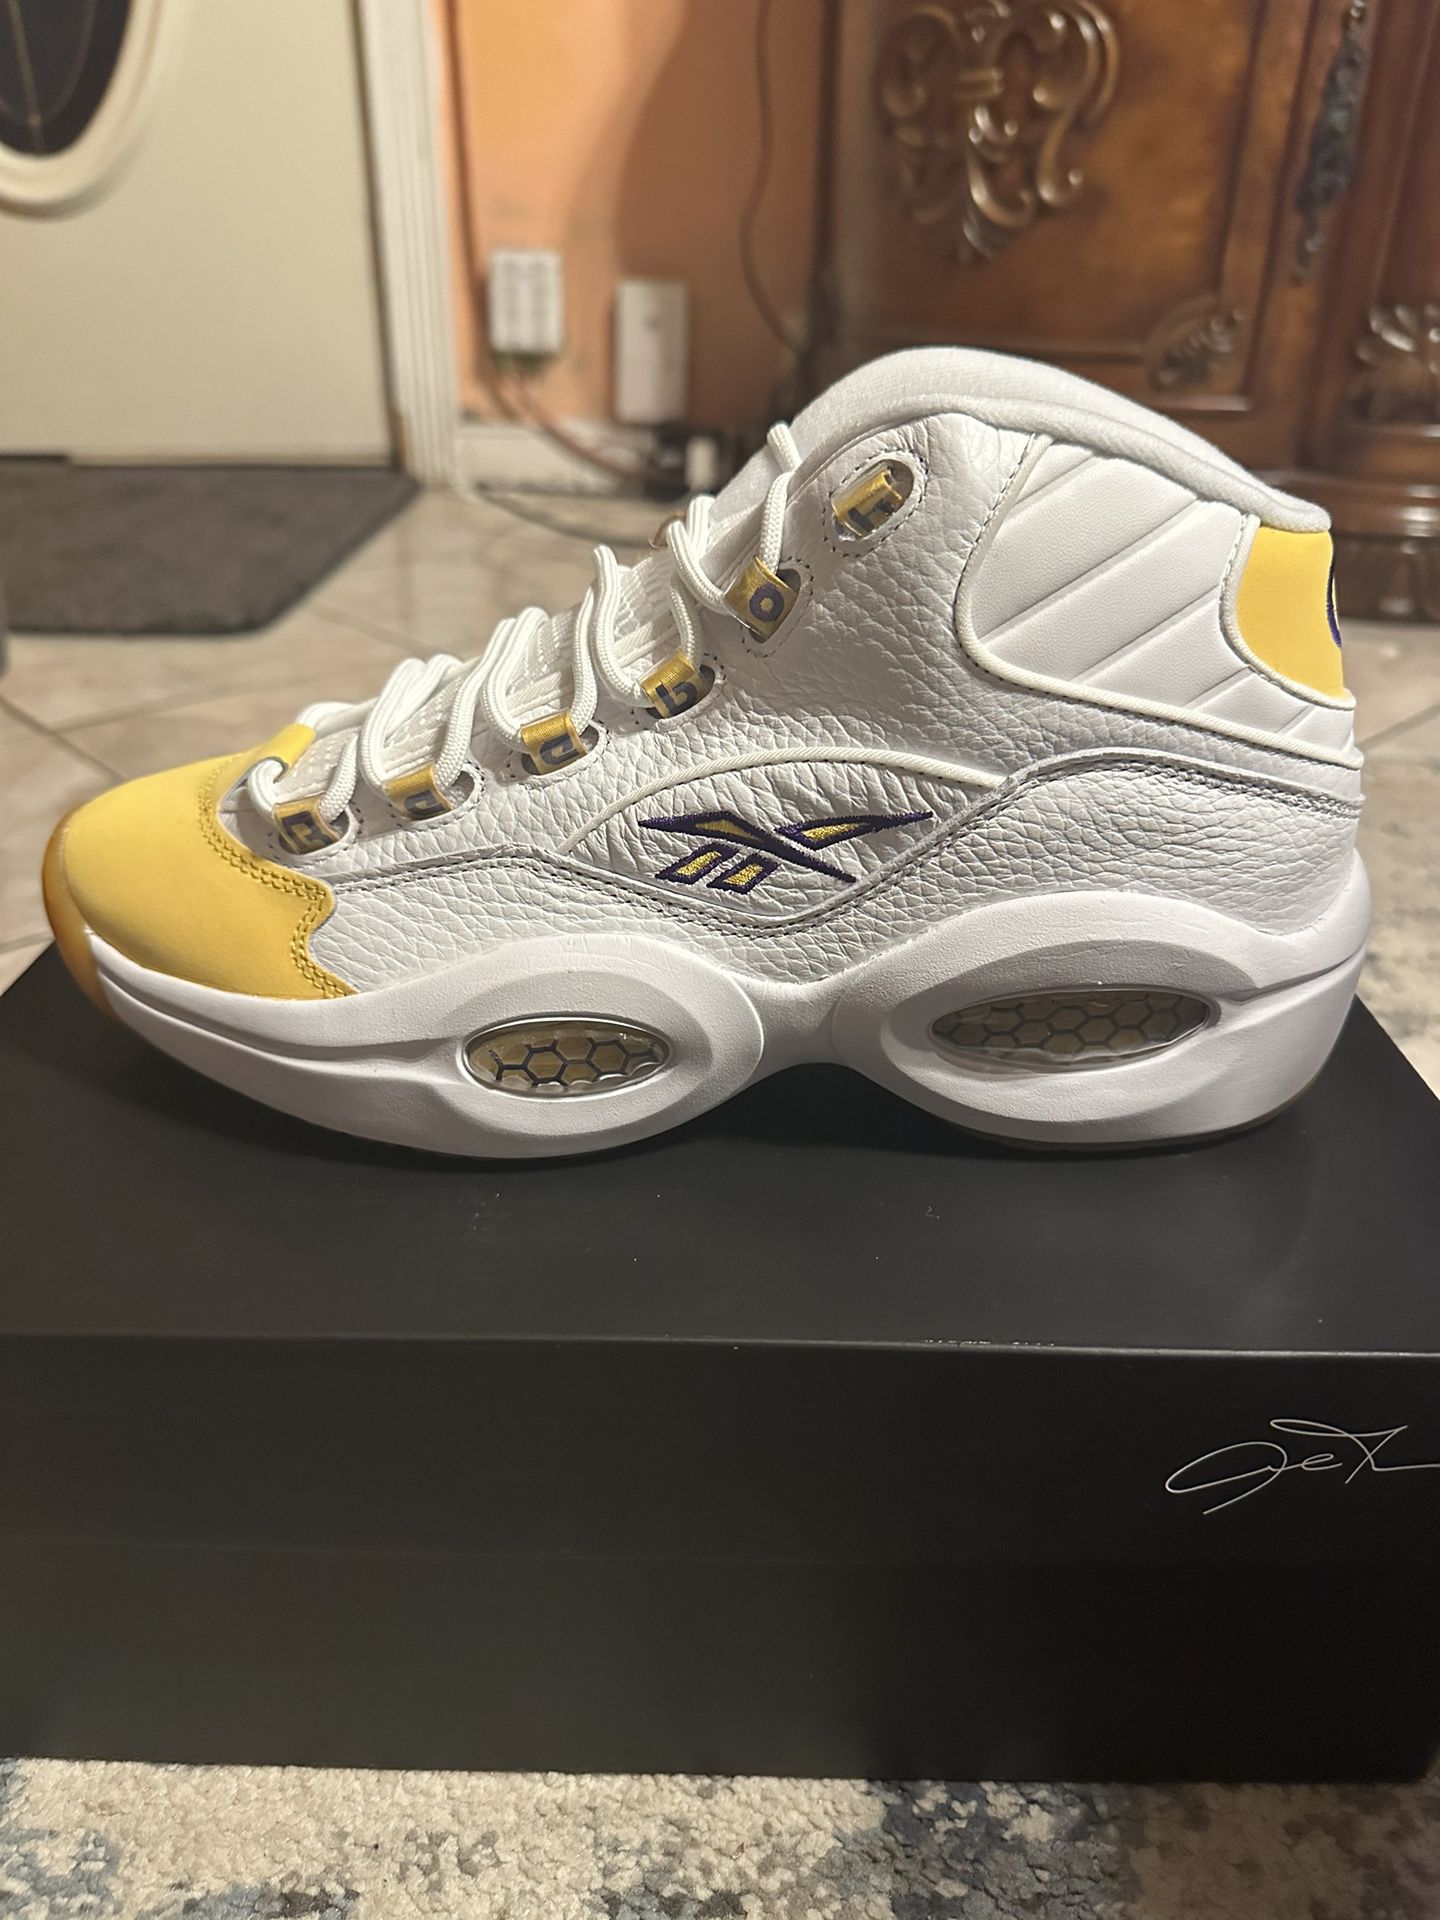 Brand new Reebok Question Mid Yellow Toe size 9.5 with Box 